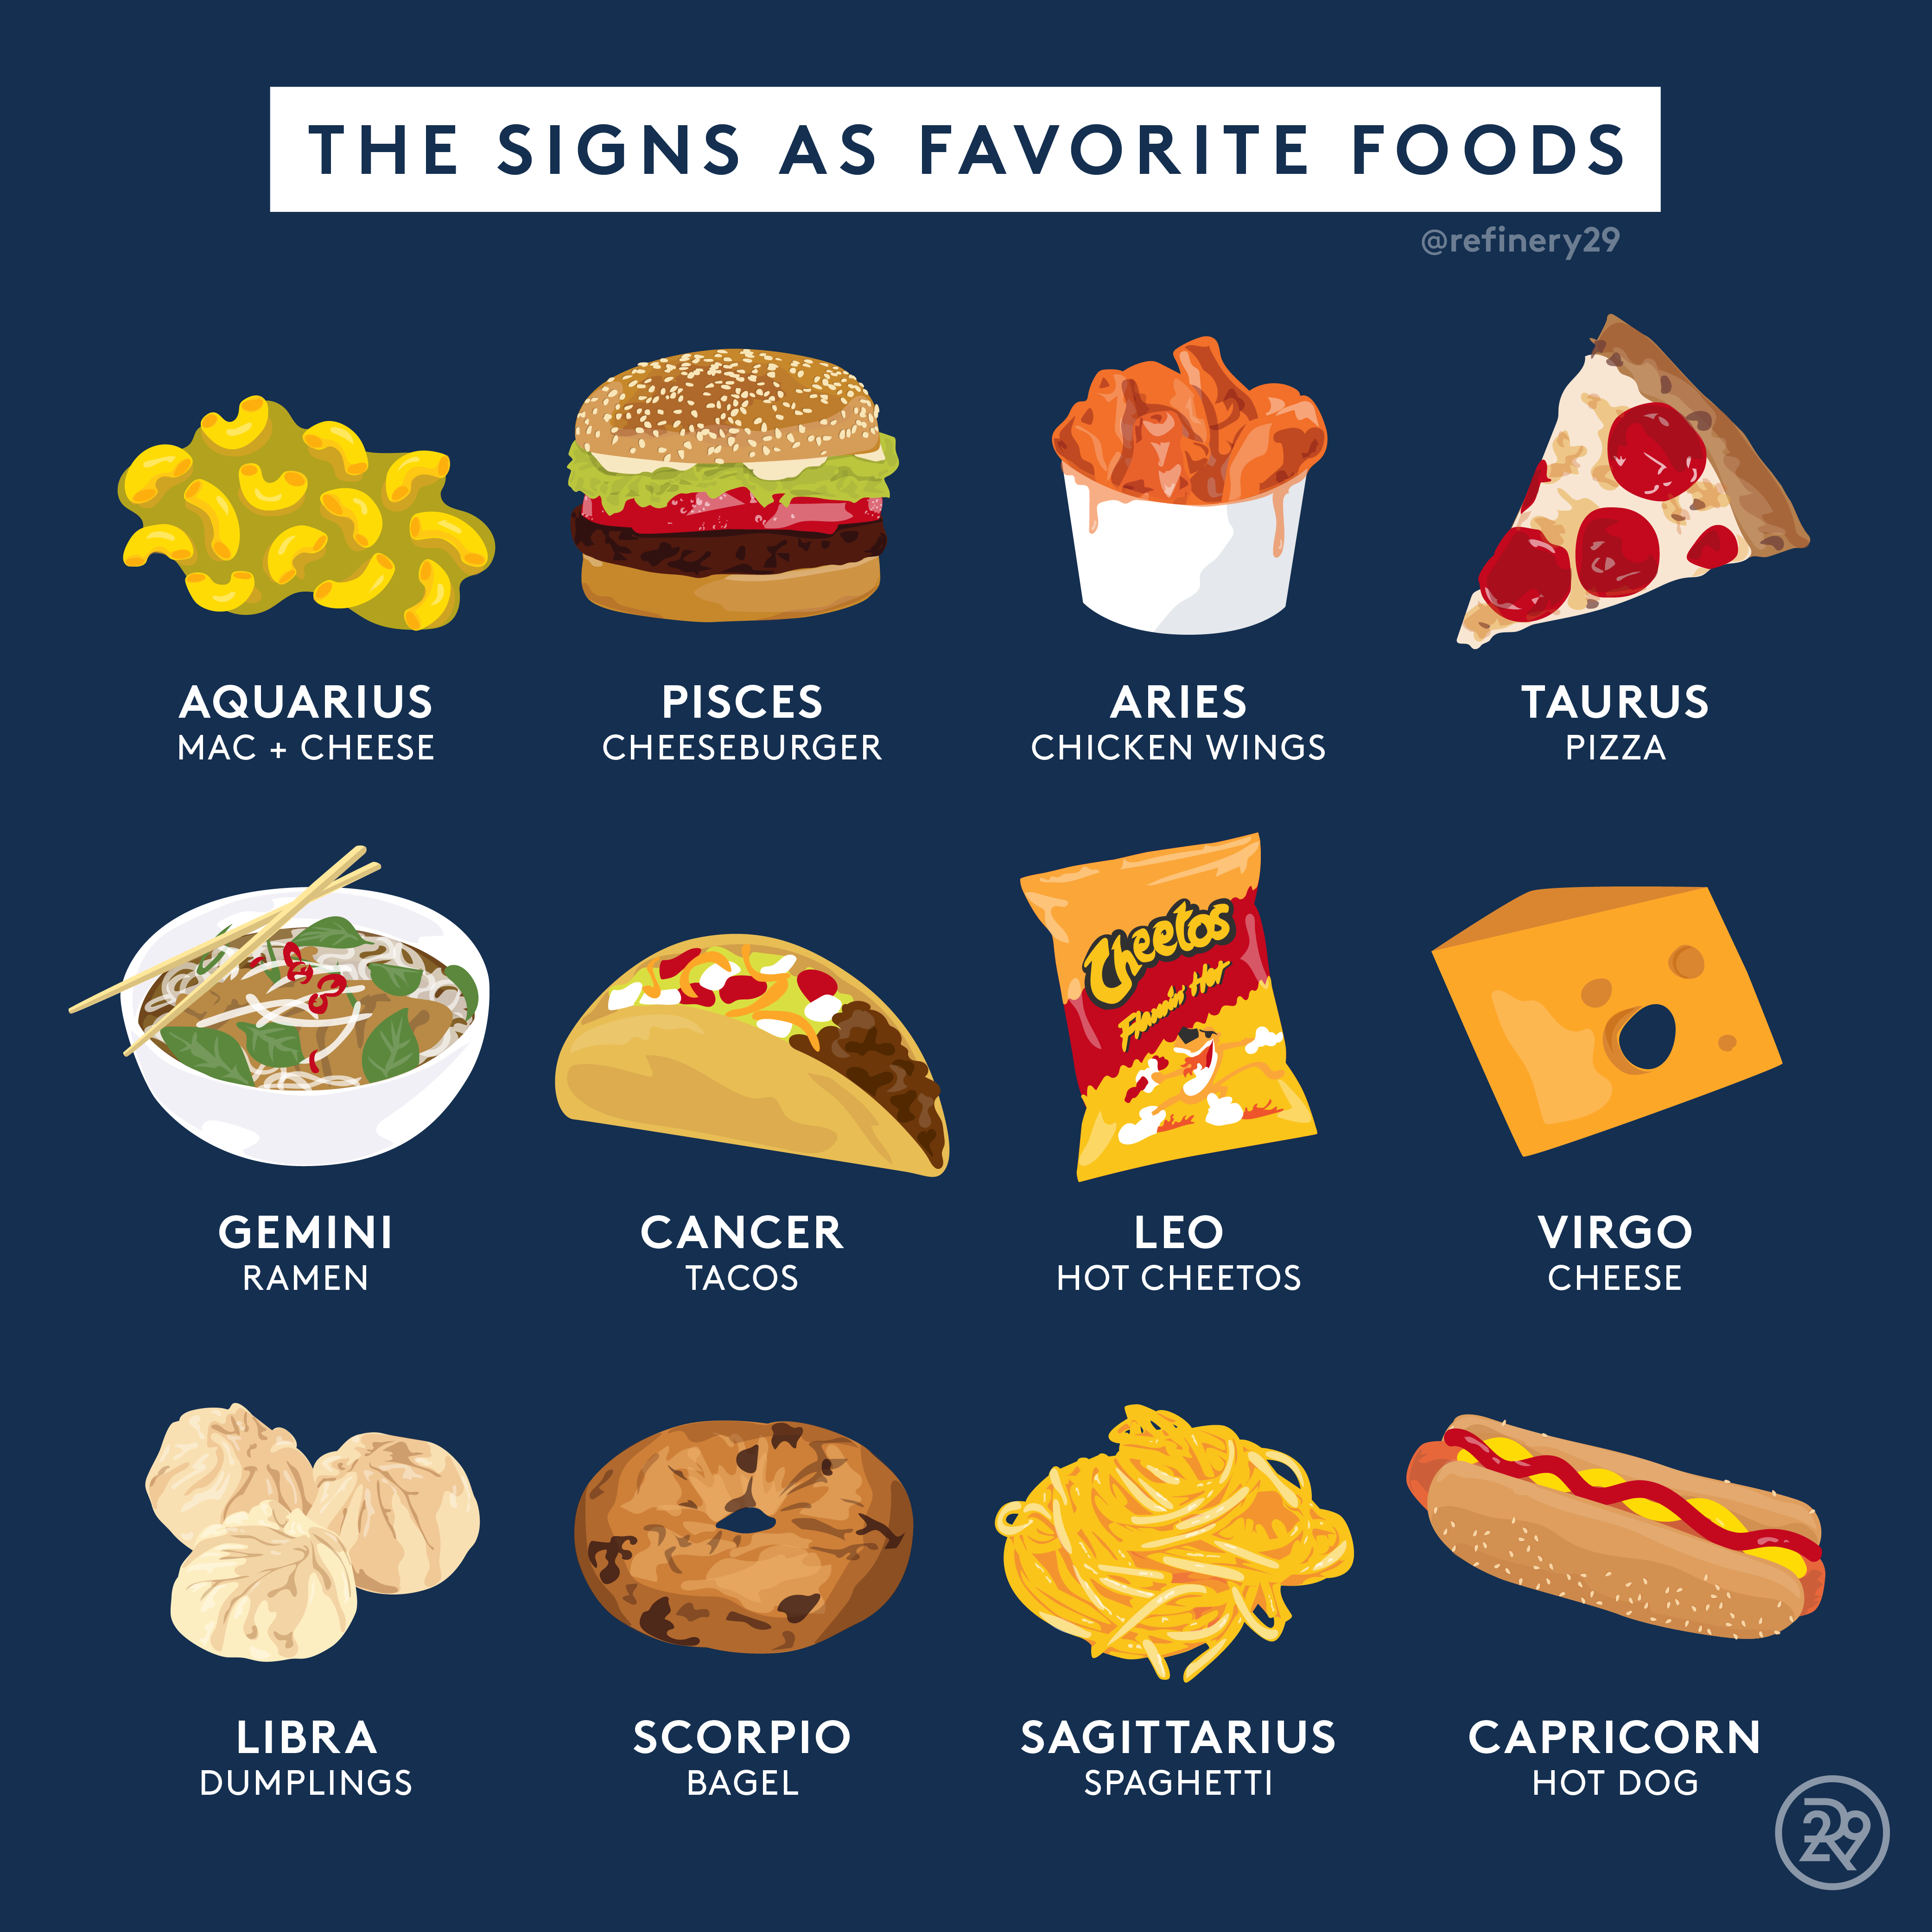 Food according to the zodiac: how to eat Leo